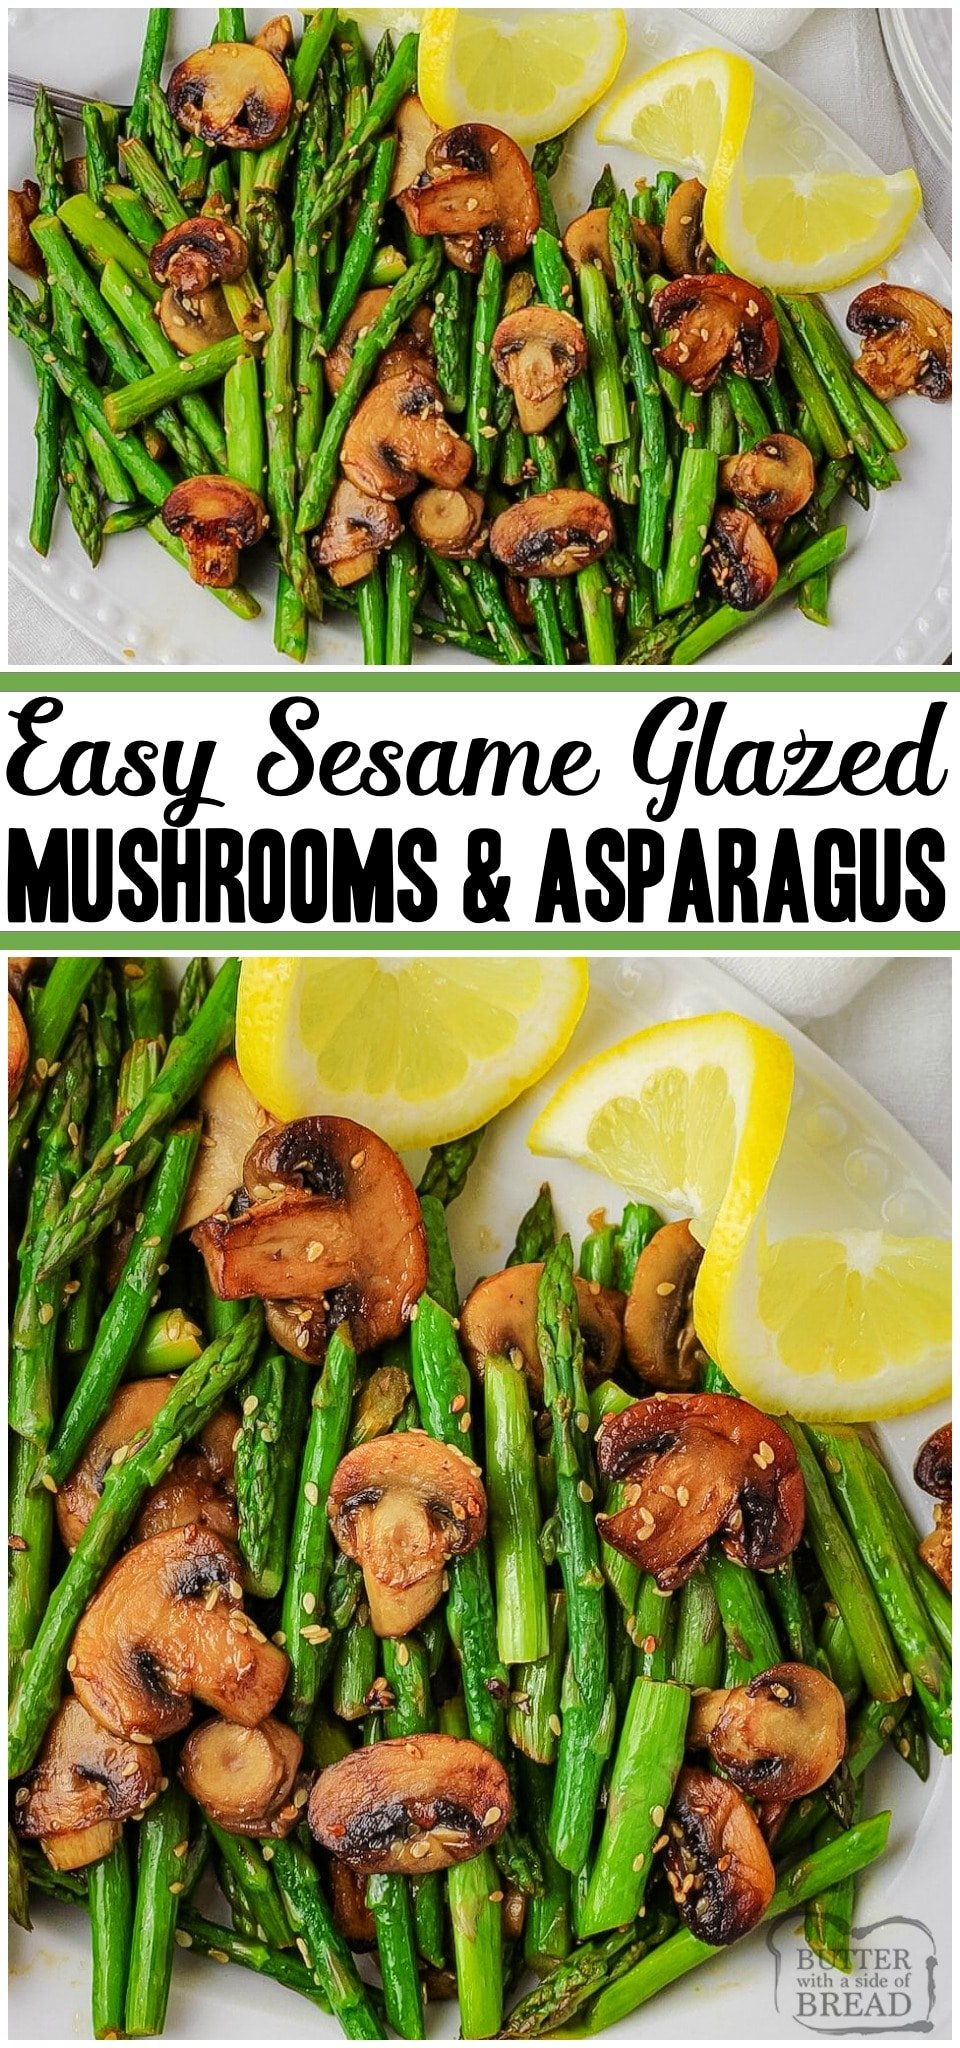 Sesame Mushrooms & Asparagus is a delicious vegetable side dish with a hint of lemon and sesame oil that adds awesome flavor. This simple asparagus recipe only has 7 ingredients and can be sautéed or grilled.